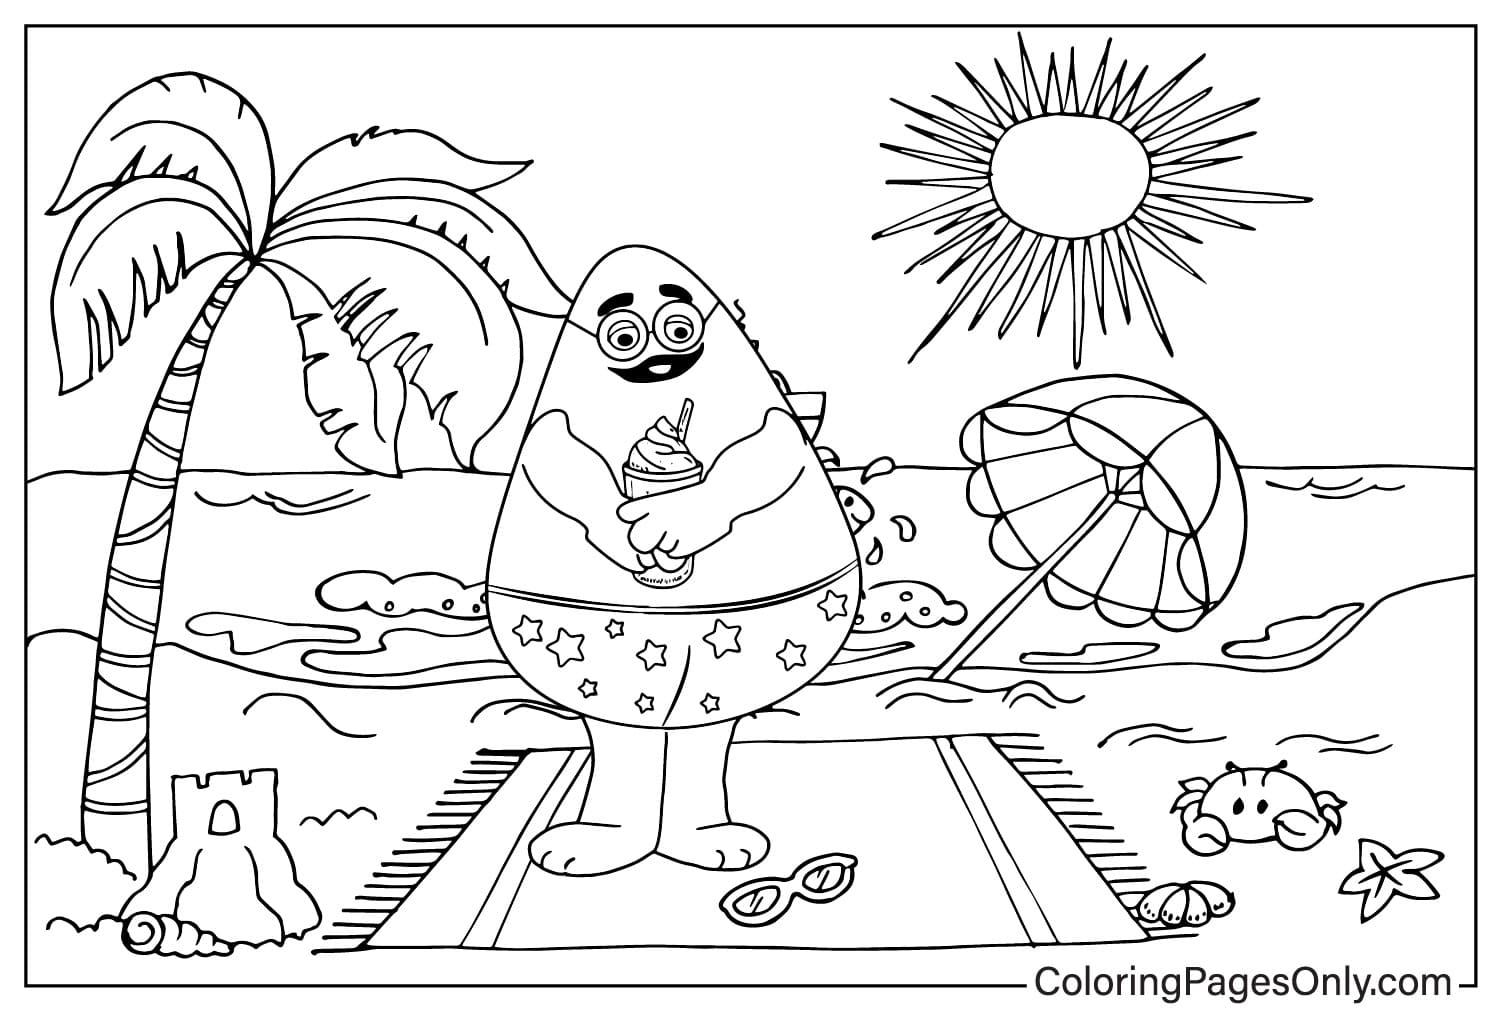 Grimace on the Beach Coloring Page from Grimace